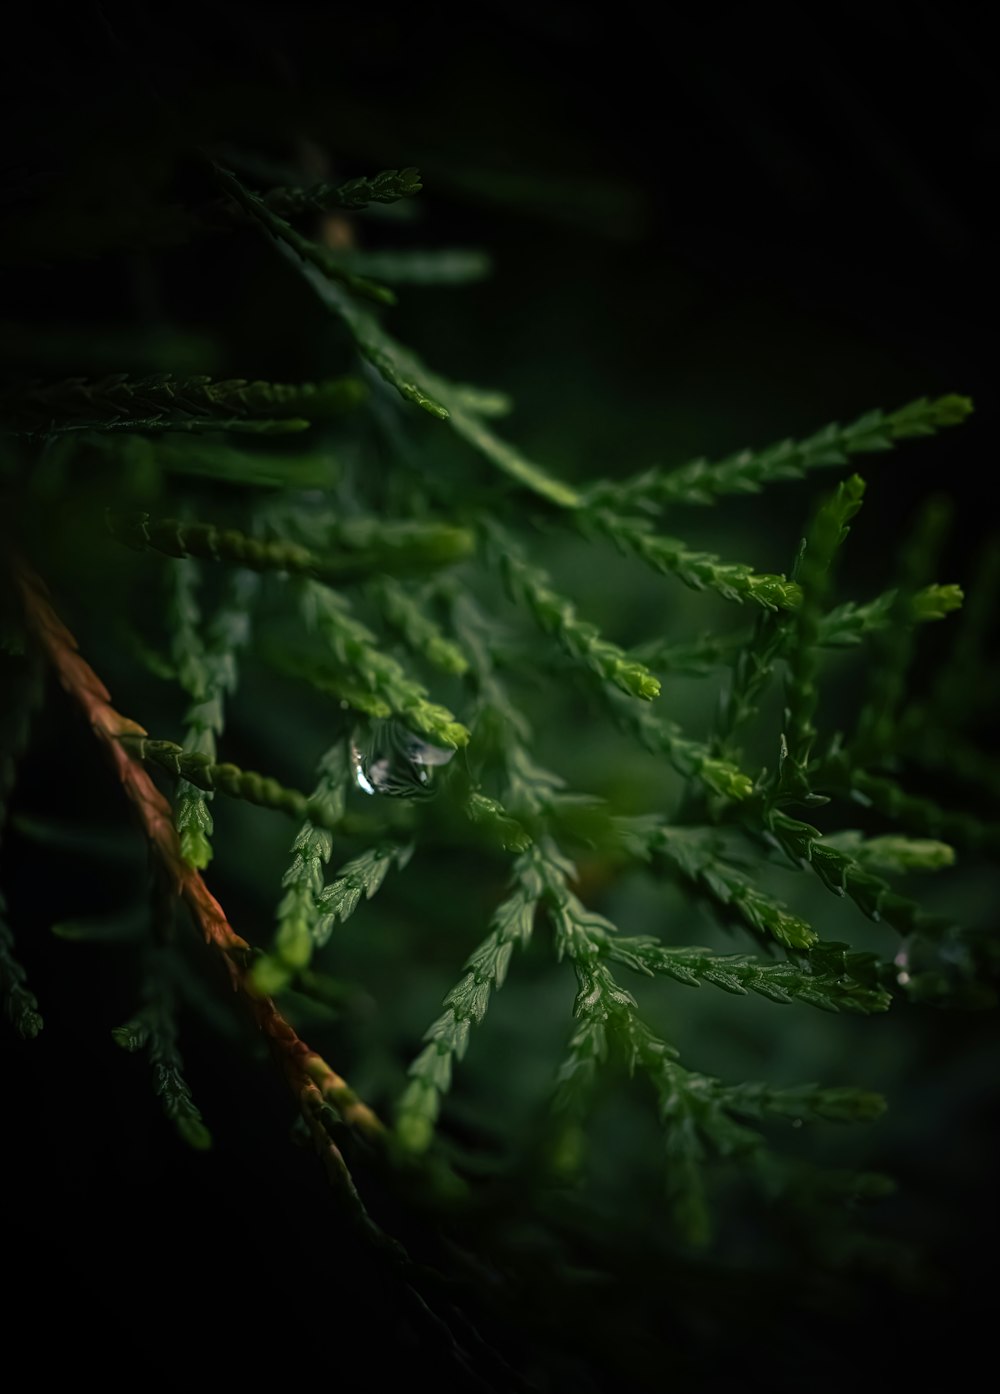 a close up of a tree branch with drops of water on it